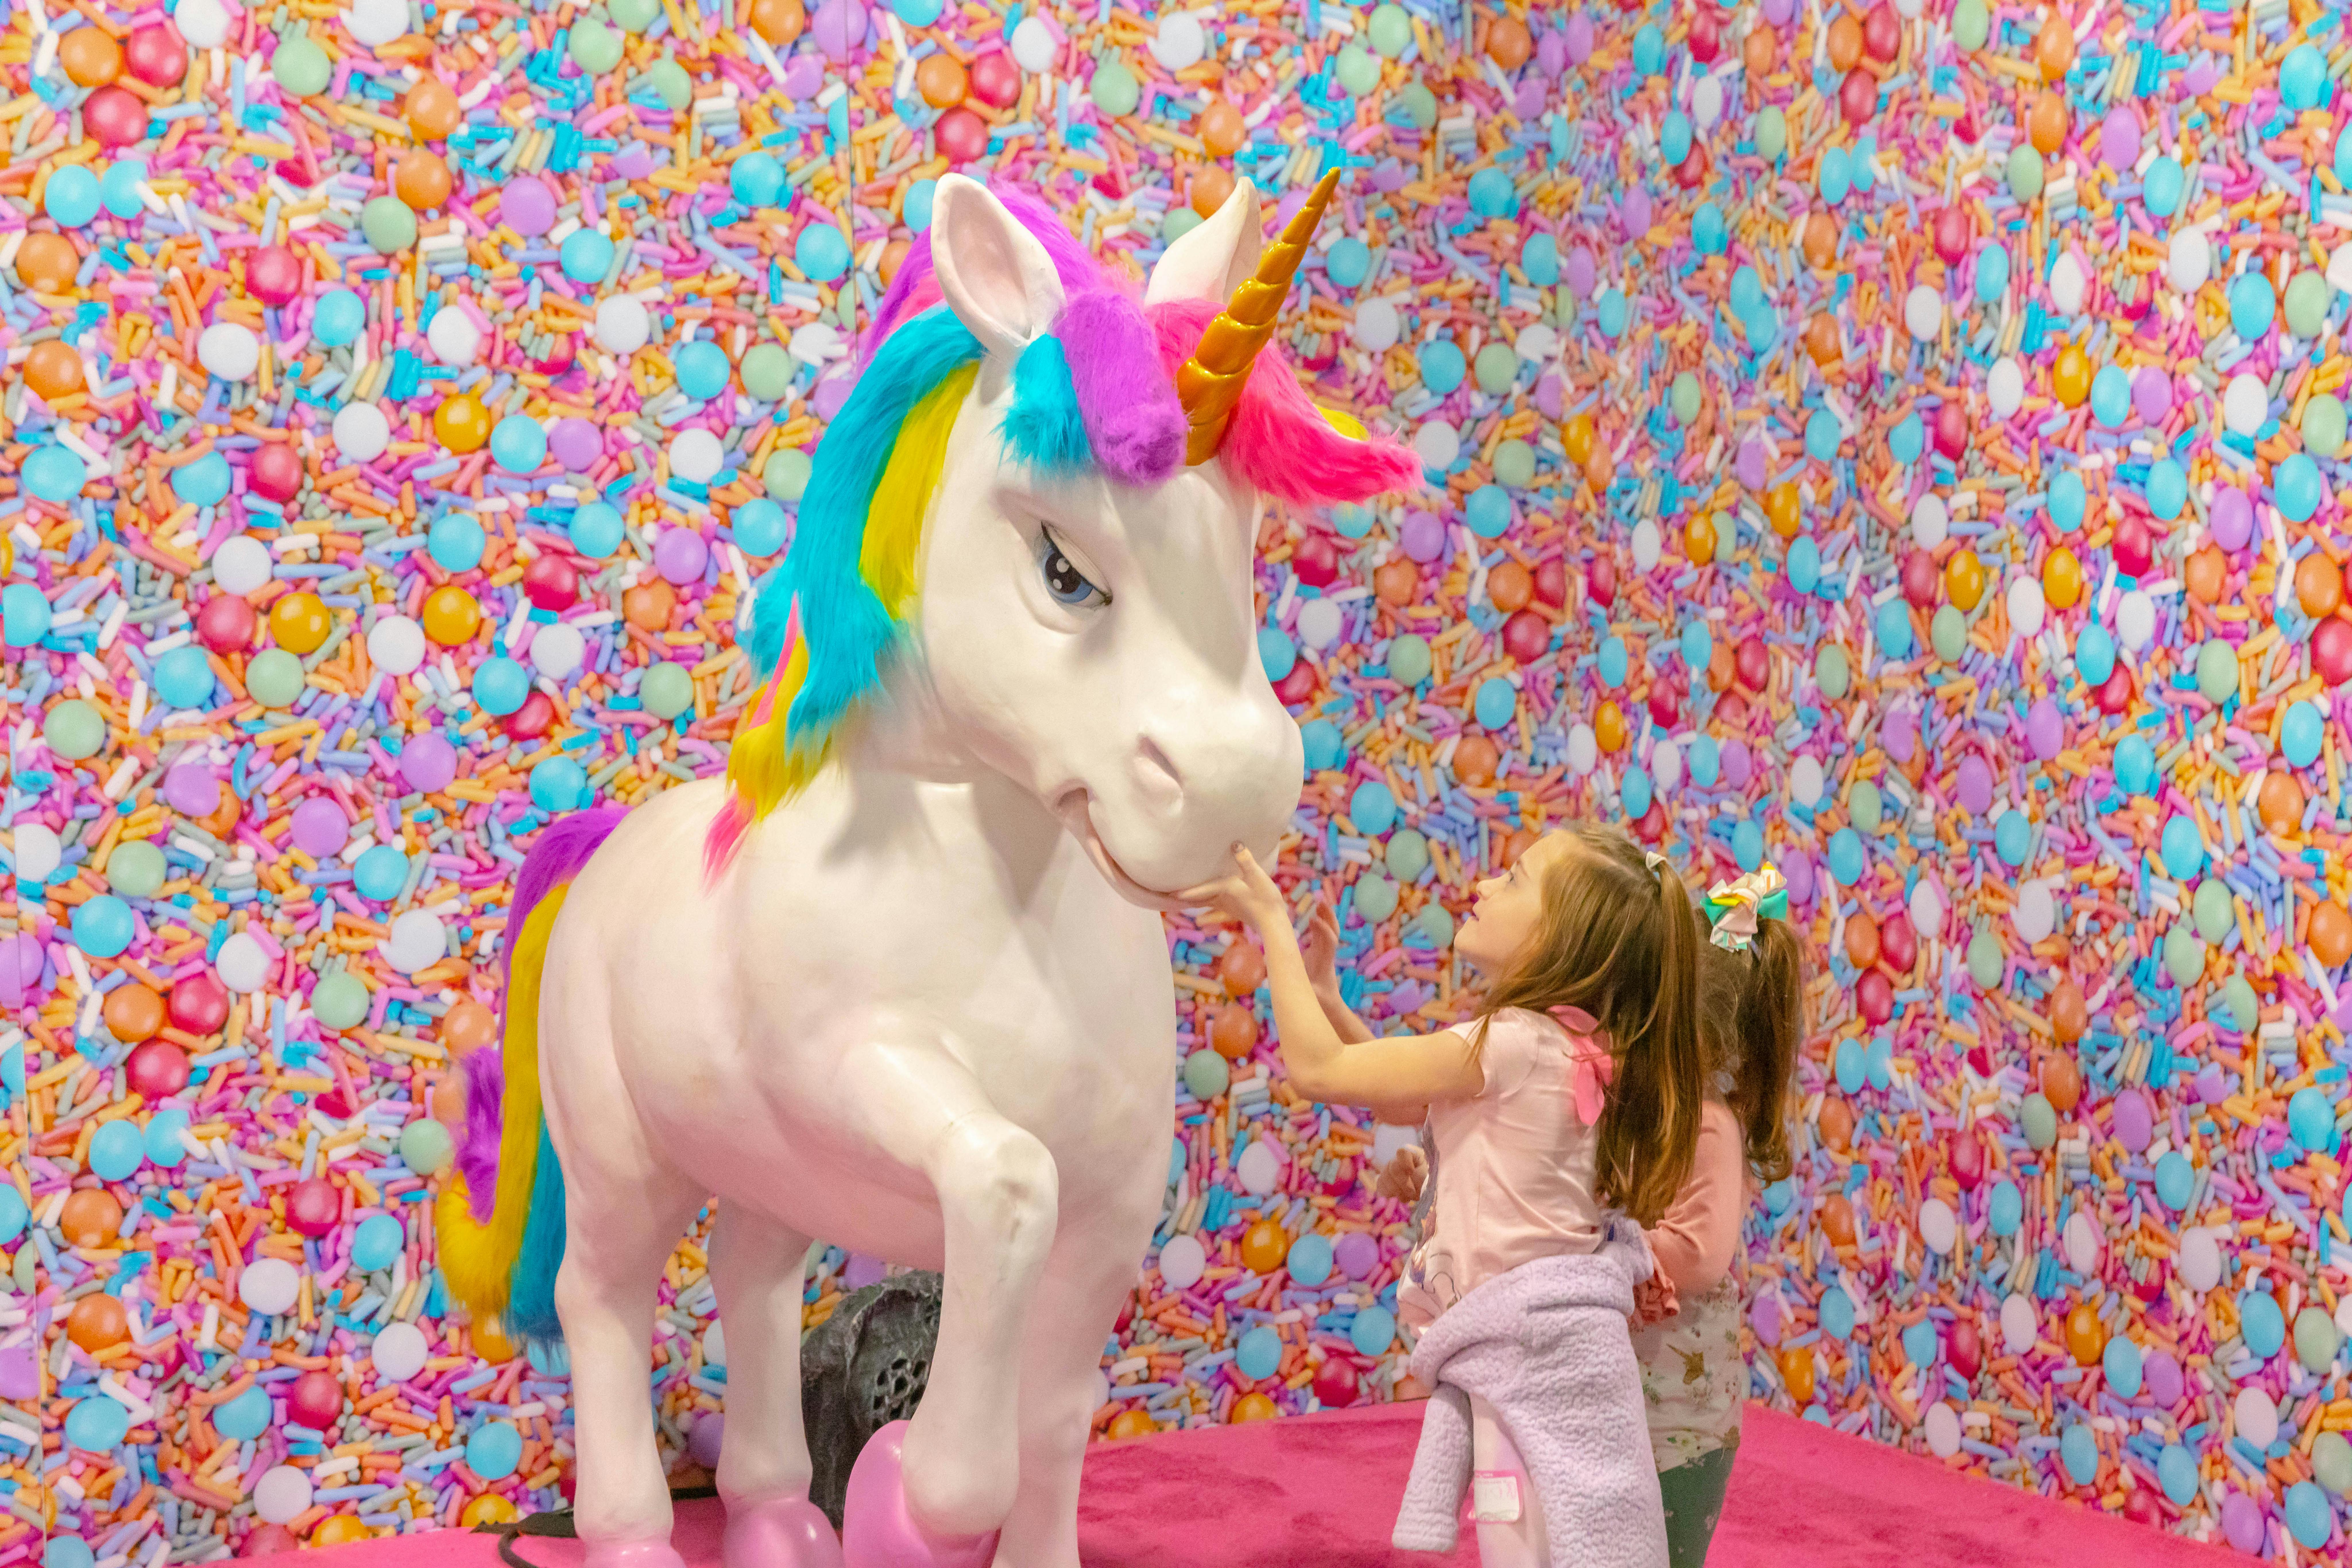 The life-size unicorns each have a distinct color scheme and personality, evoking My Little Pony toys parents may remember.